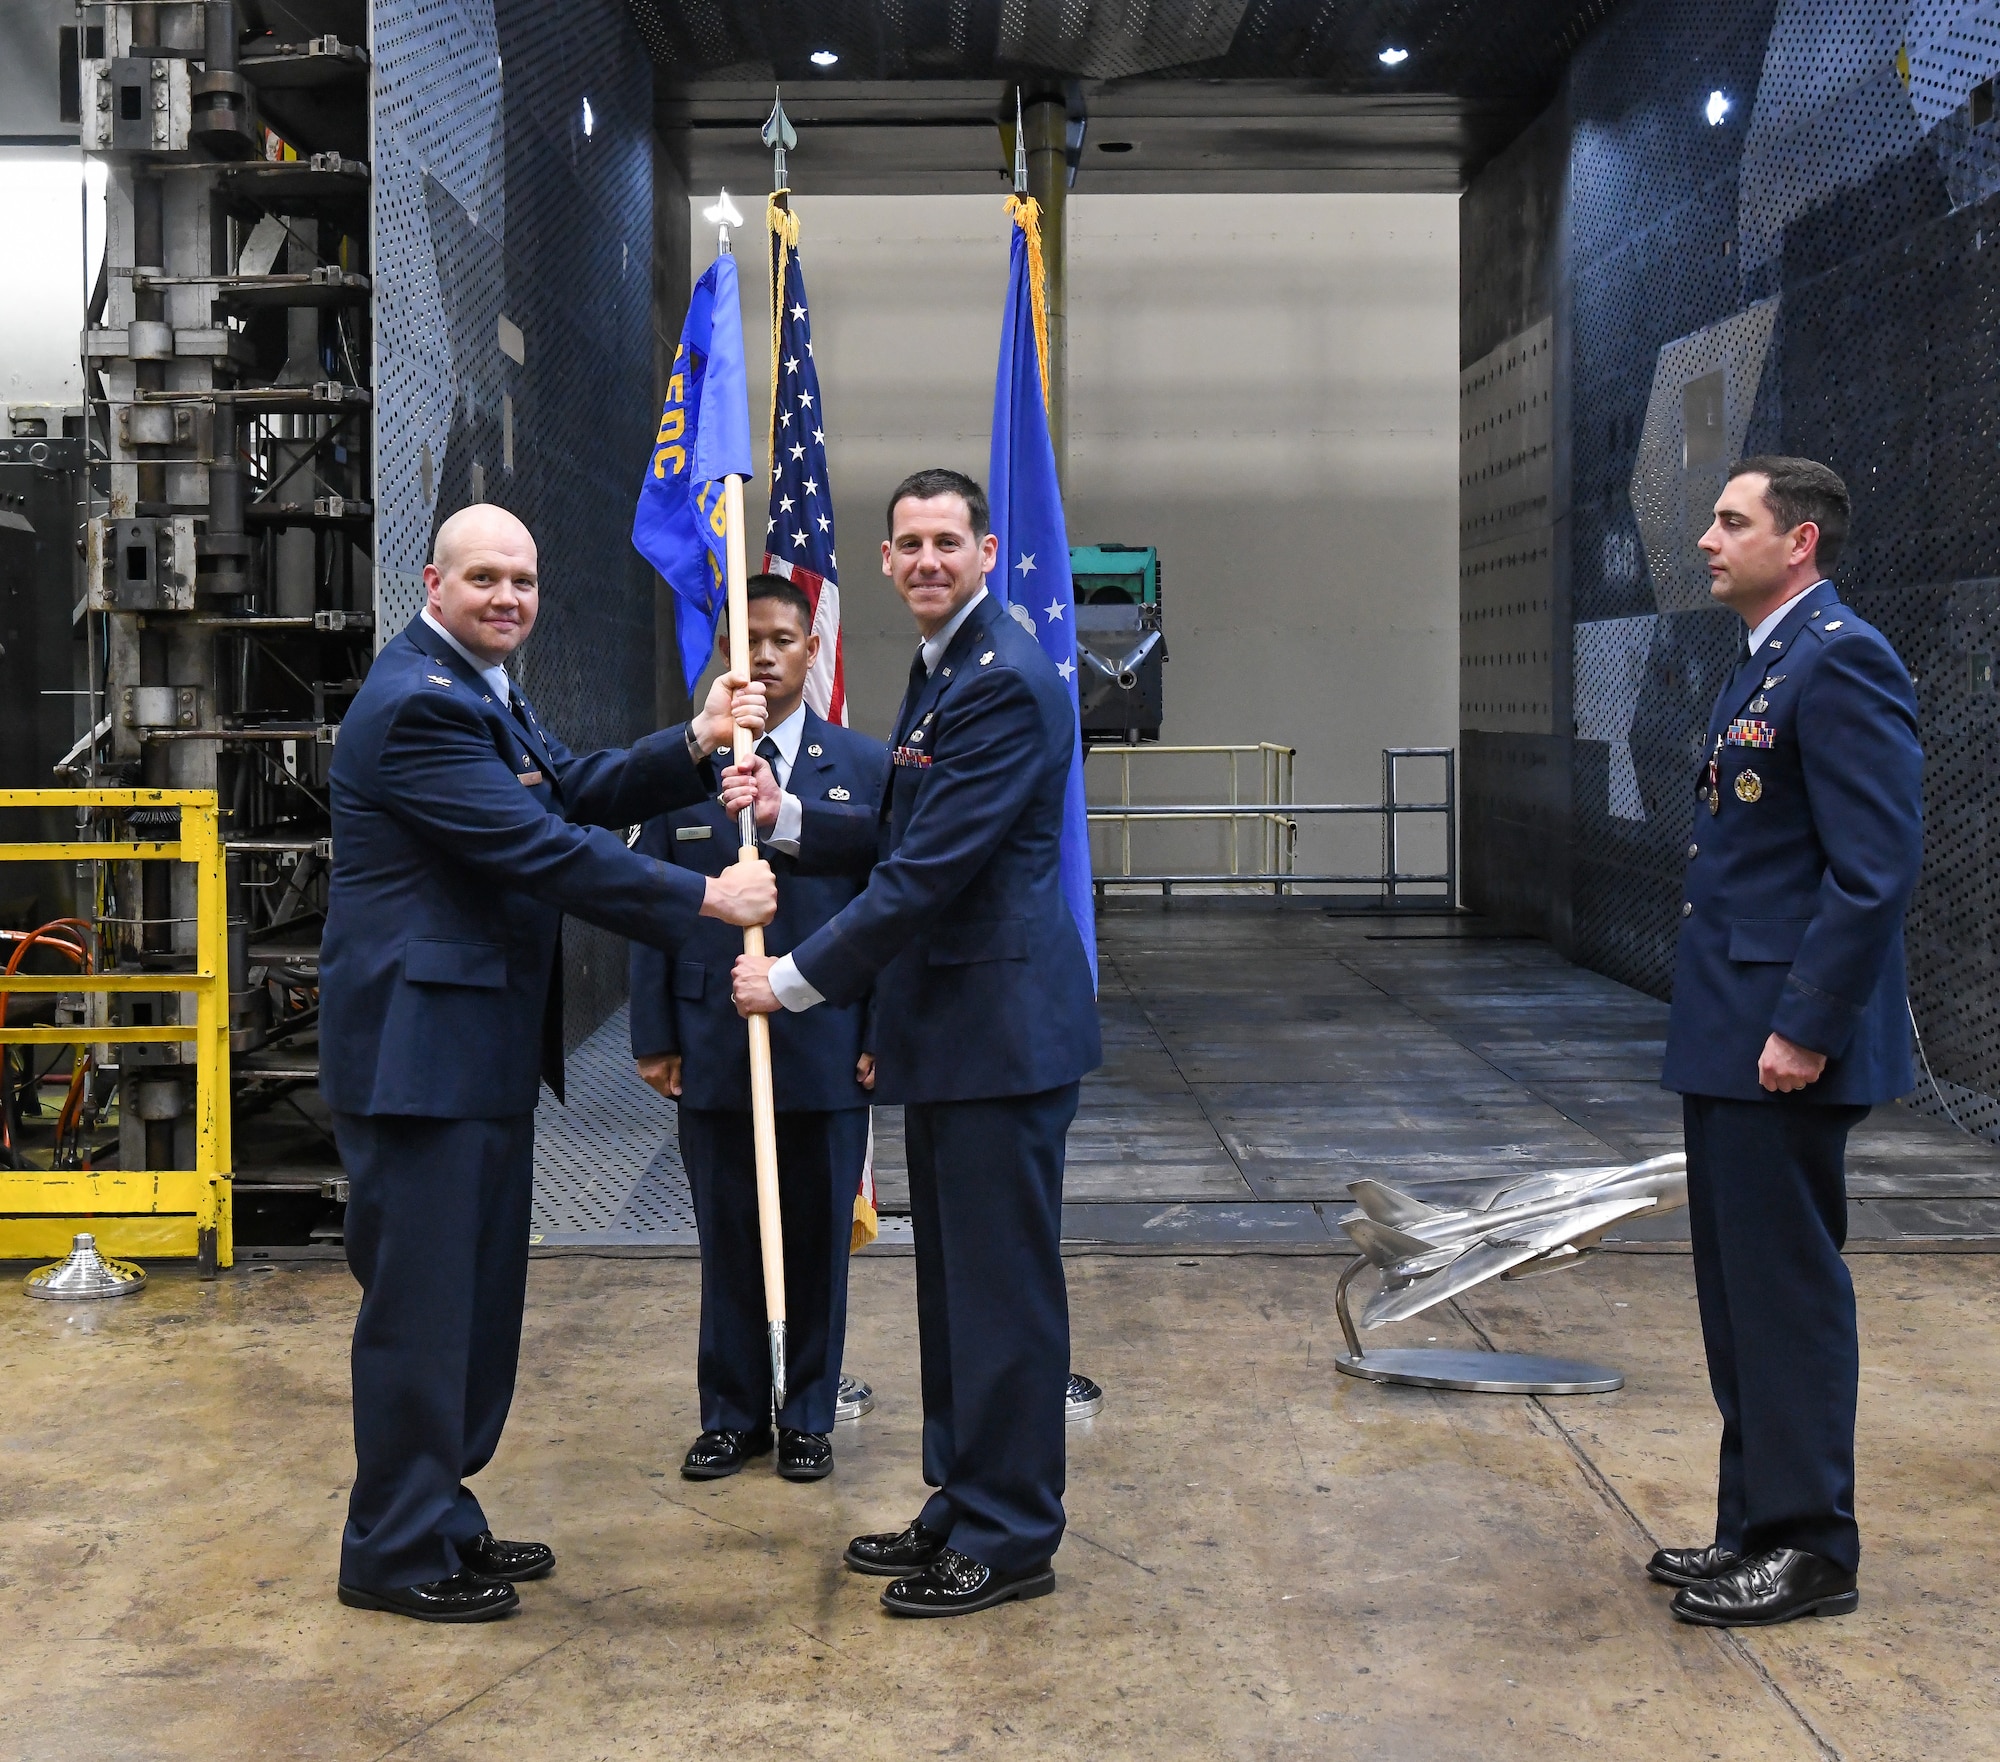 Col. Jason Vap, left, commander, 804th Test Group, passes the 716th Test Squadron guidon to Lt. Col. James Gresham charging him with command of the squadron during a change of command ceremony June 30, 2022.